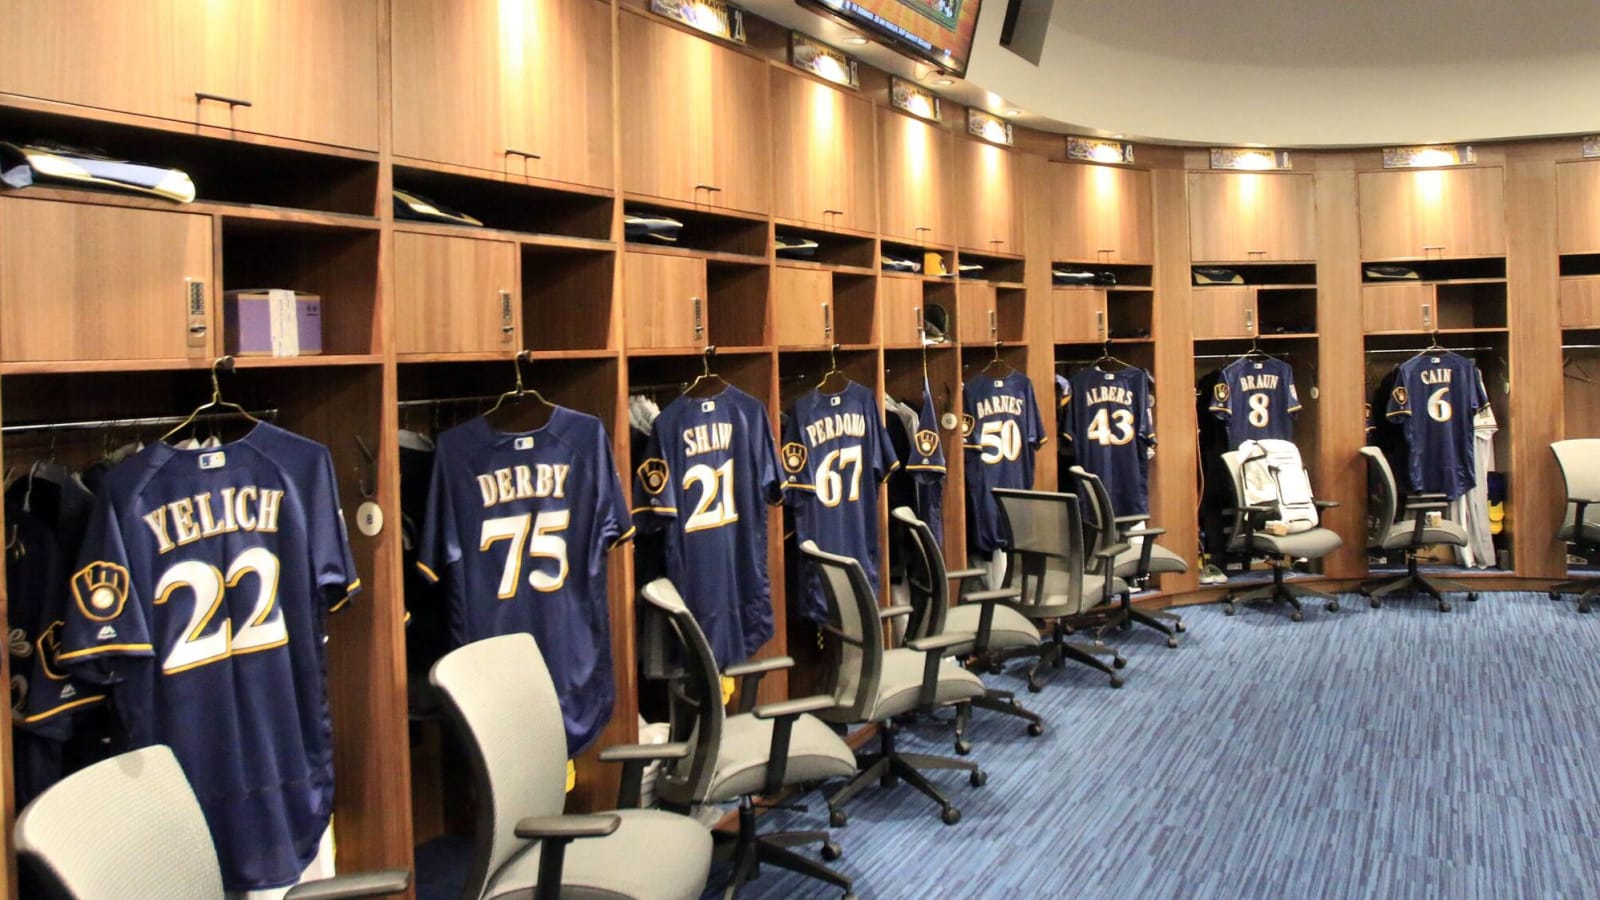 Man charged with felony burglary of Brewers clubhouse